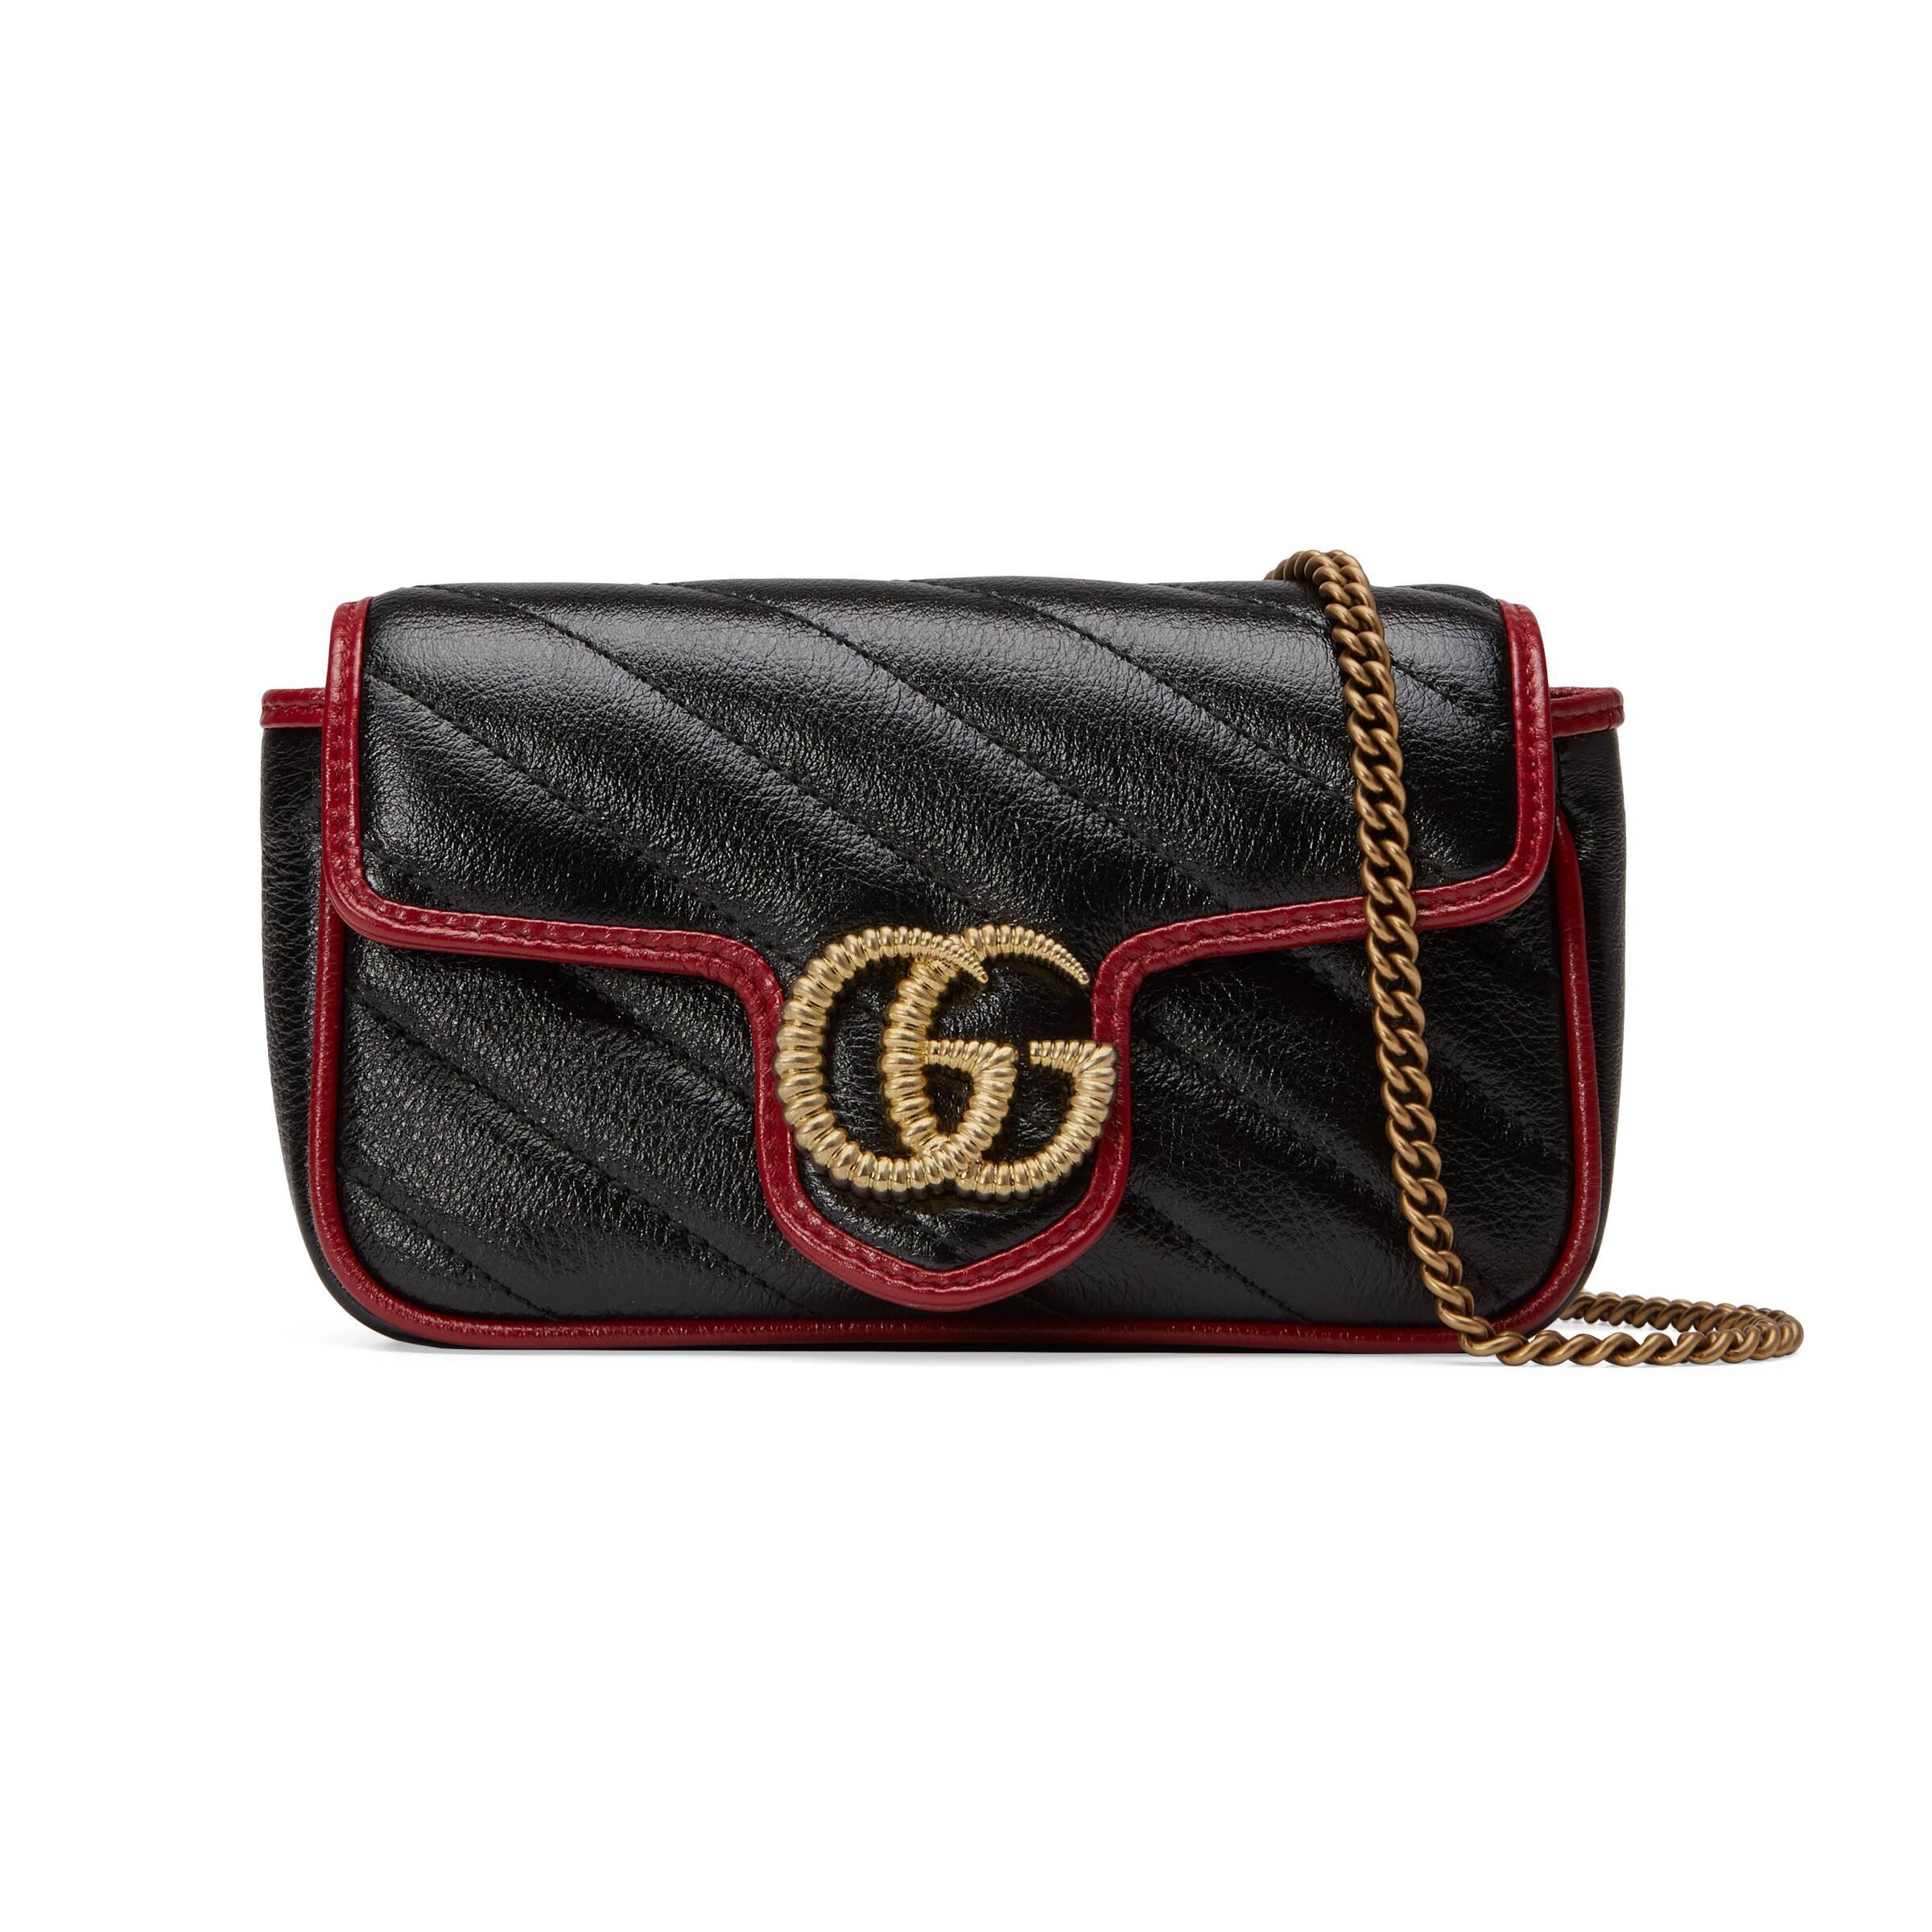 Gucci Leather GG Marmont Super Mini Bag in Black Leather (Black) - Save 15% - Lyst